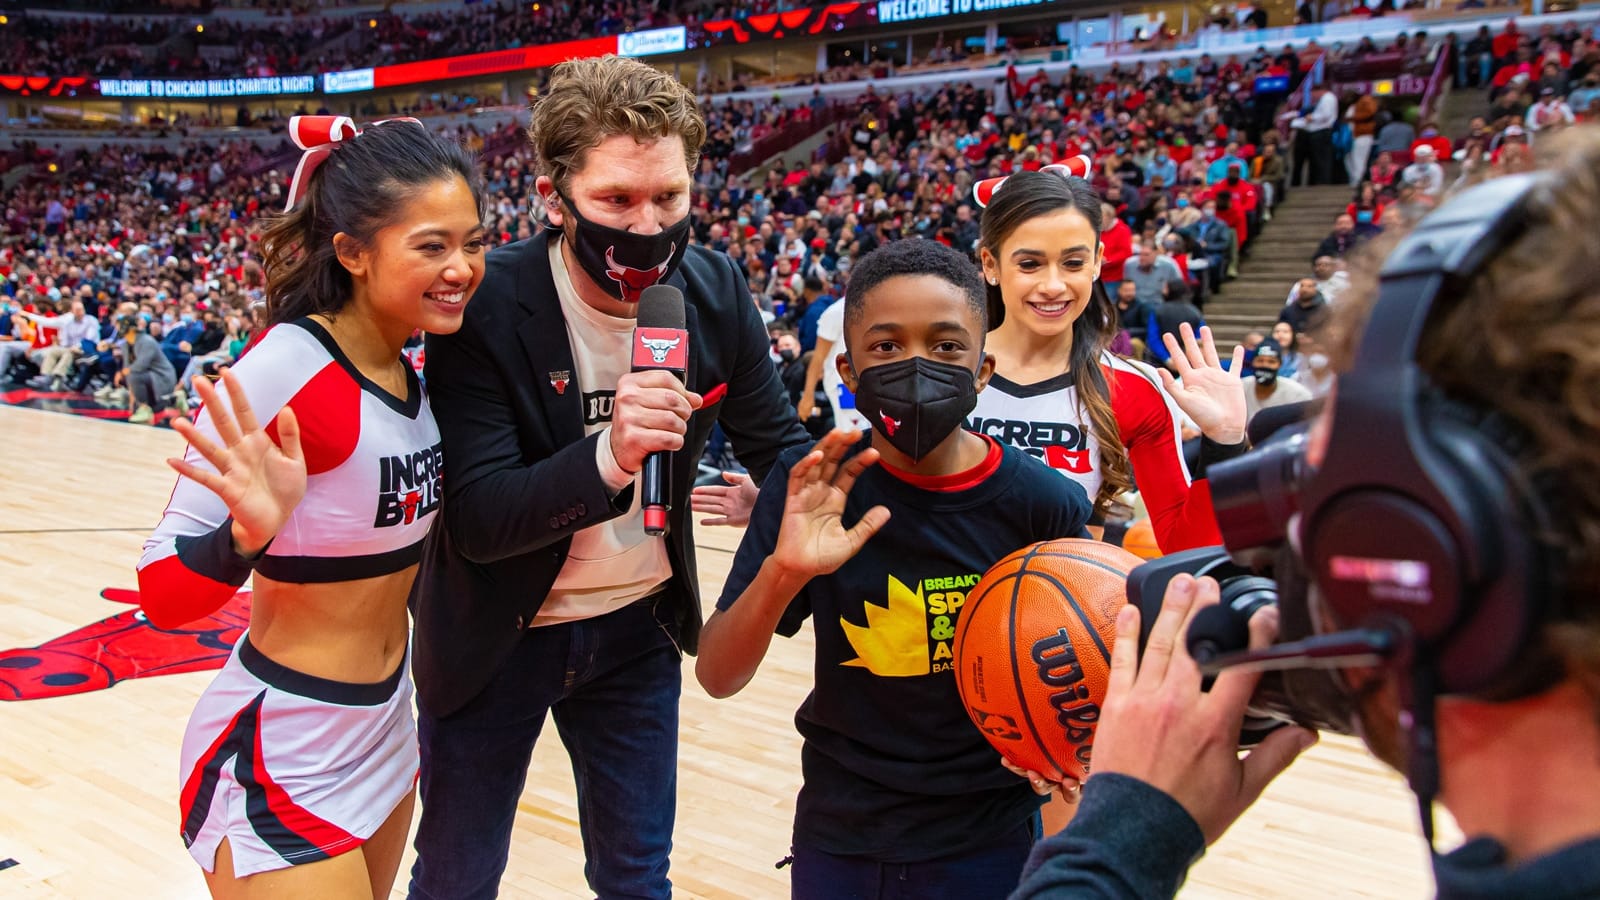 Bulls Host “Chicago Bulls Charities Night” to Honor Breakthrough and Other Nonprofits 2